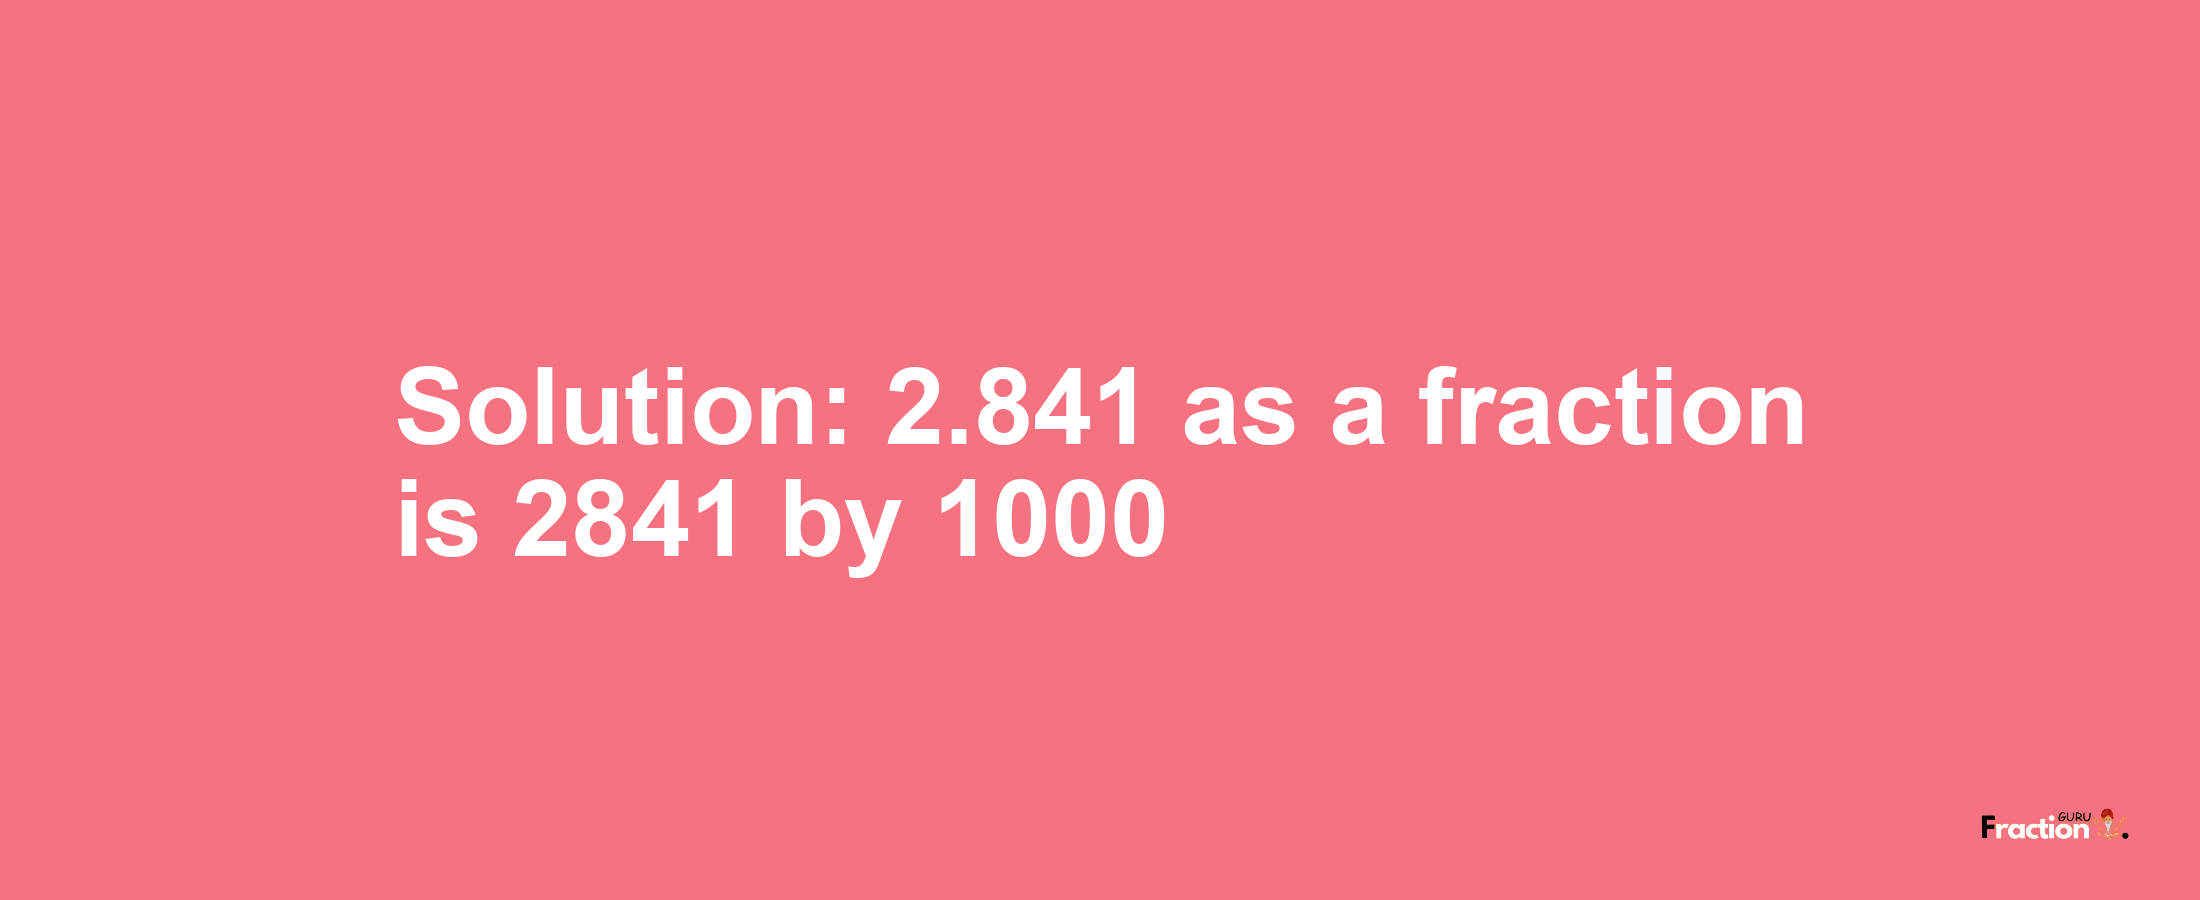 Solution:2.841 as a fraction is 2841/1000